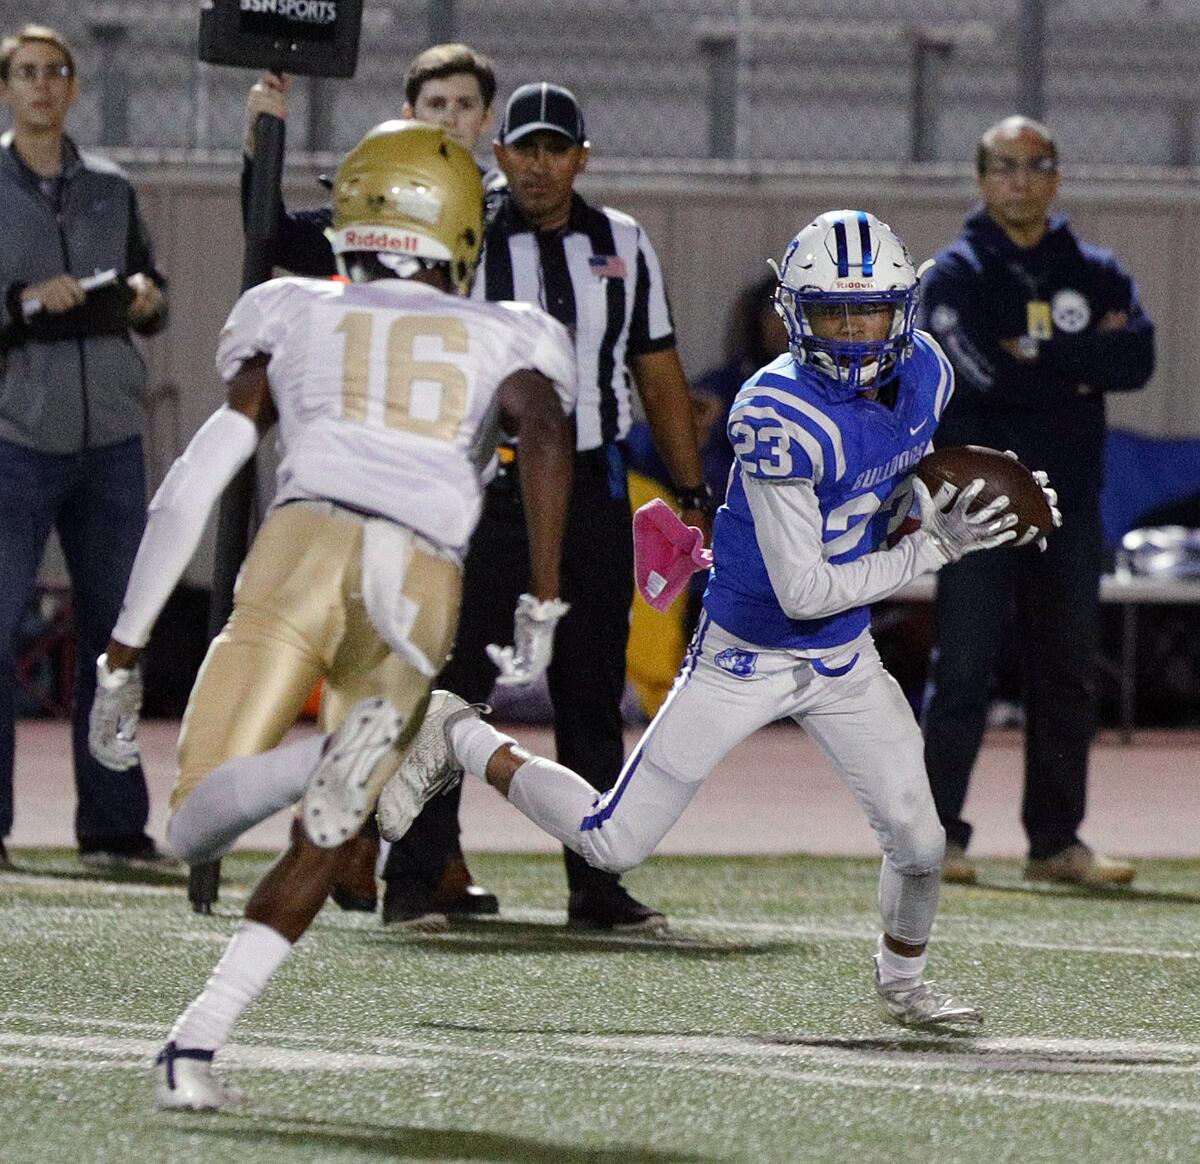 Burbank's Kaze Gibbs, after catching a screen pass, turns to face Muir's Asa Roberson in a Pacific League football game at Burroughs High School on Monday, October 14, 2019.